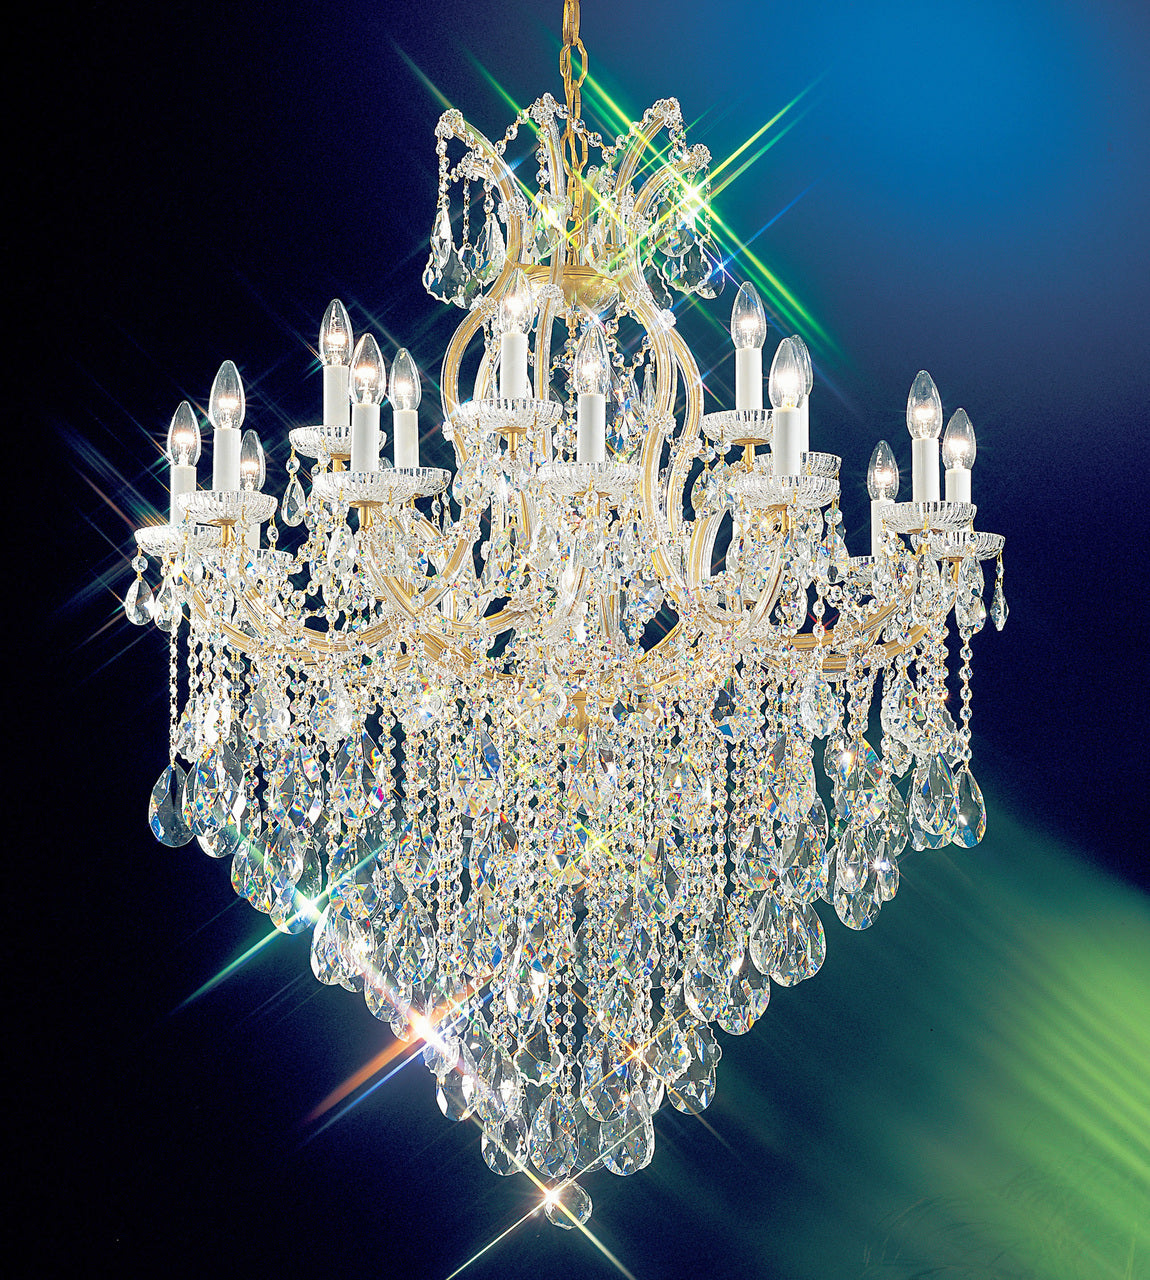 Classic Lighting 8128 OWG S Maria Theresa Traditional Crystal Chandelier in Olde World Gold (Imported from Italy)